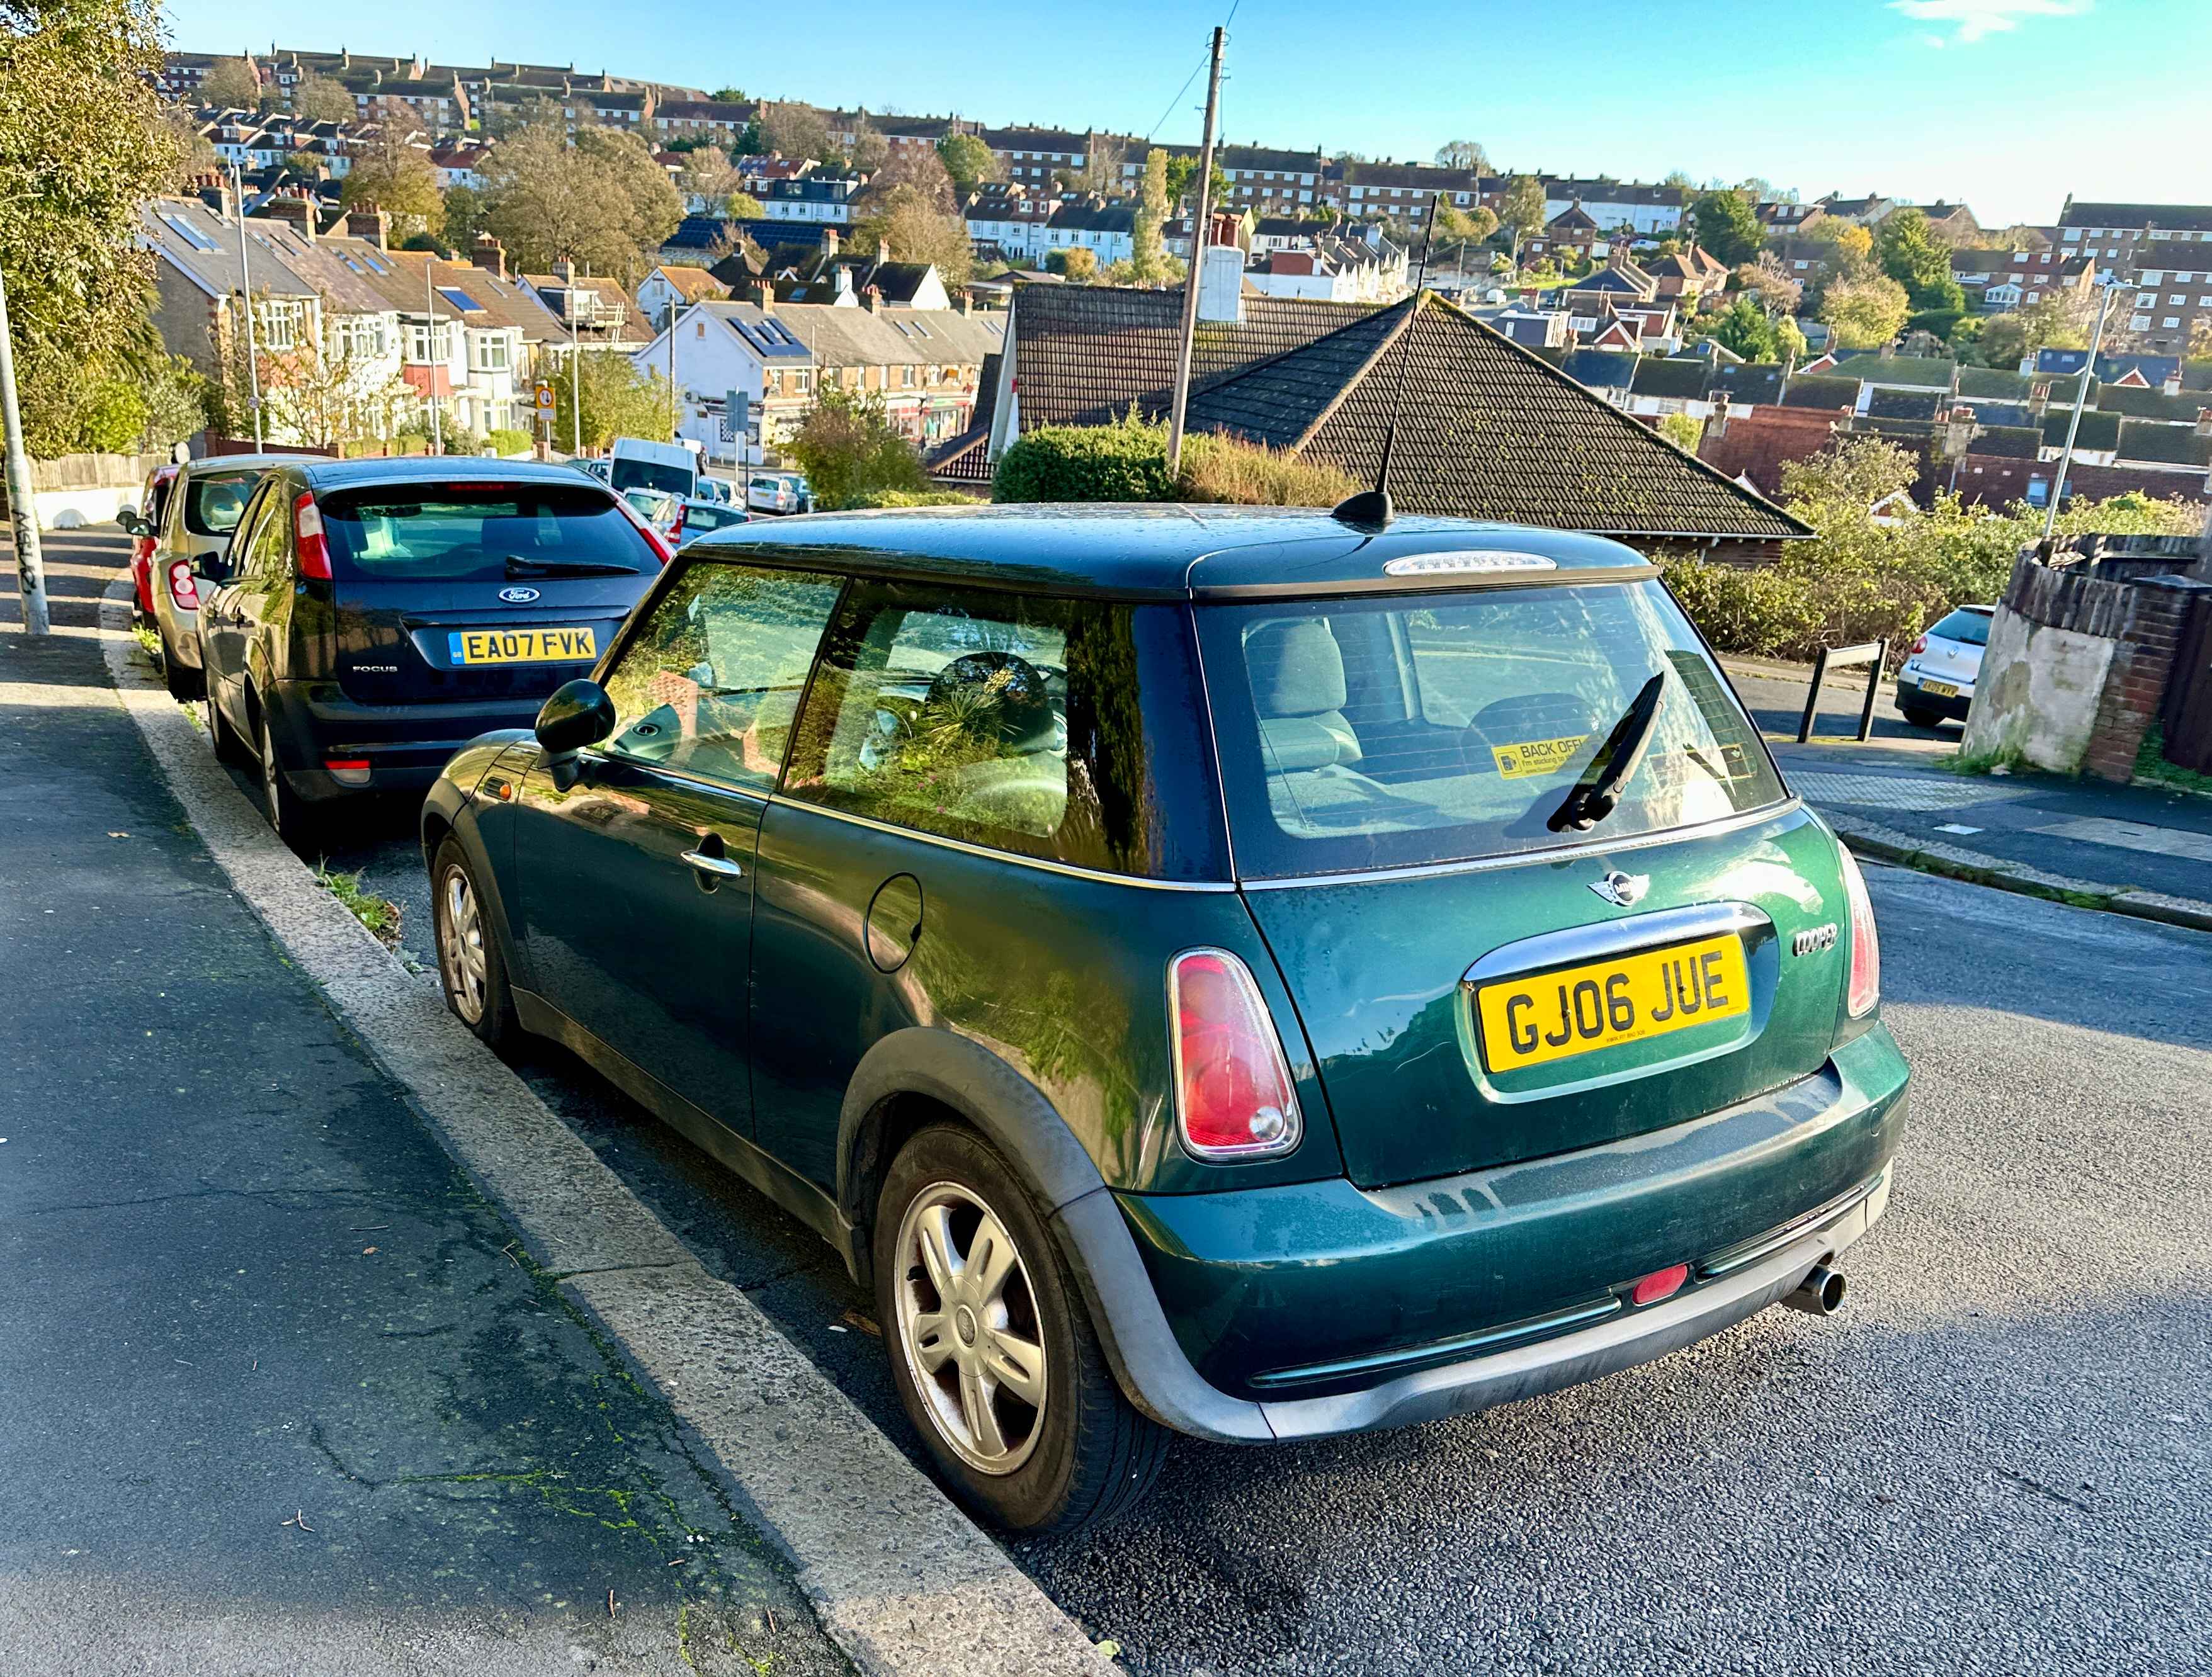 Photograph of GL06 JUE - a Green Mini Cooper parked in Hollingdean by a non-resident. The first of seven photographs supplied by the residents of Hollingdean.